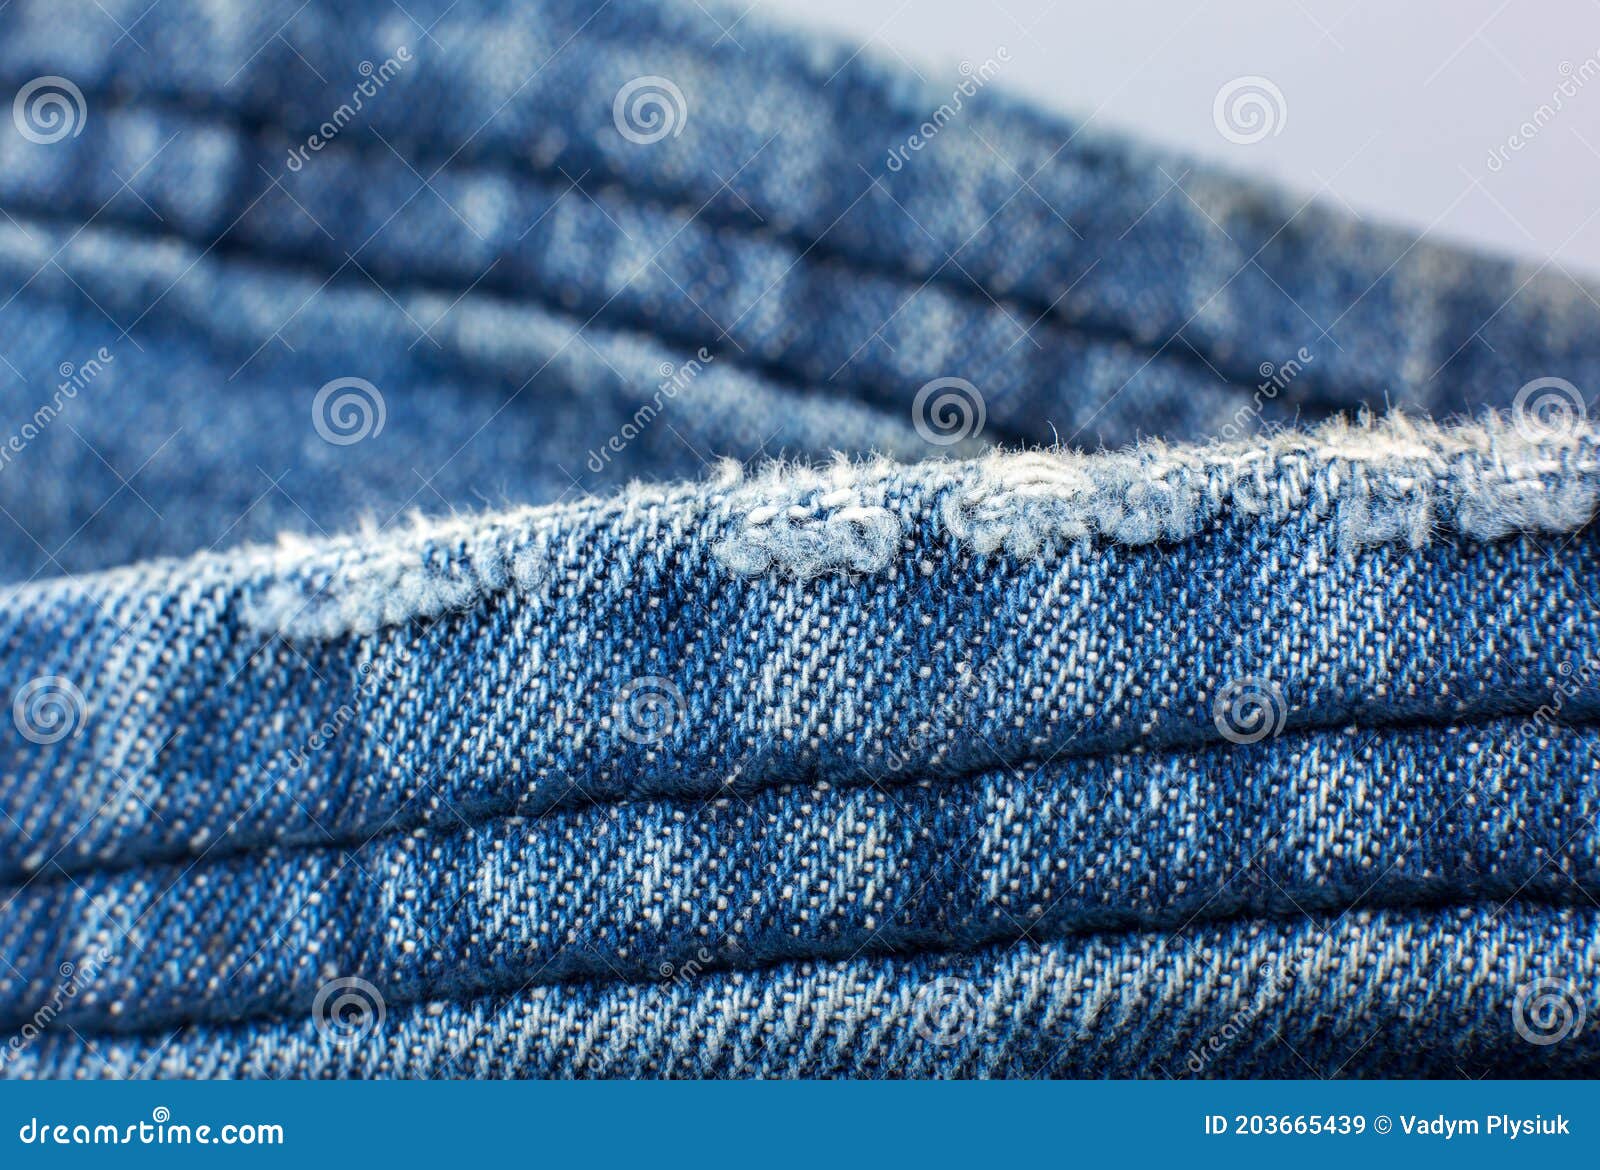 Hd Zoom Realistic Blue Denim Fabric Detailed Fiber Material Background,  Blue, Hd, Fiber Cloth Background Image And Wallpaper for Free Download